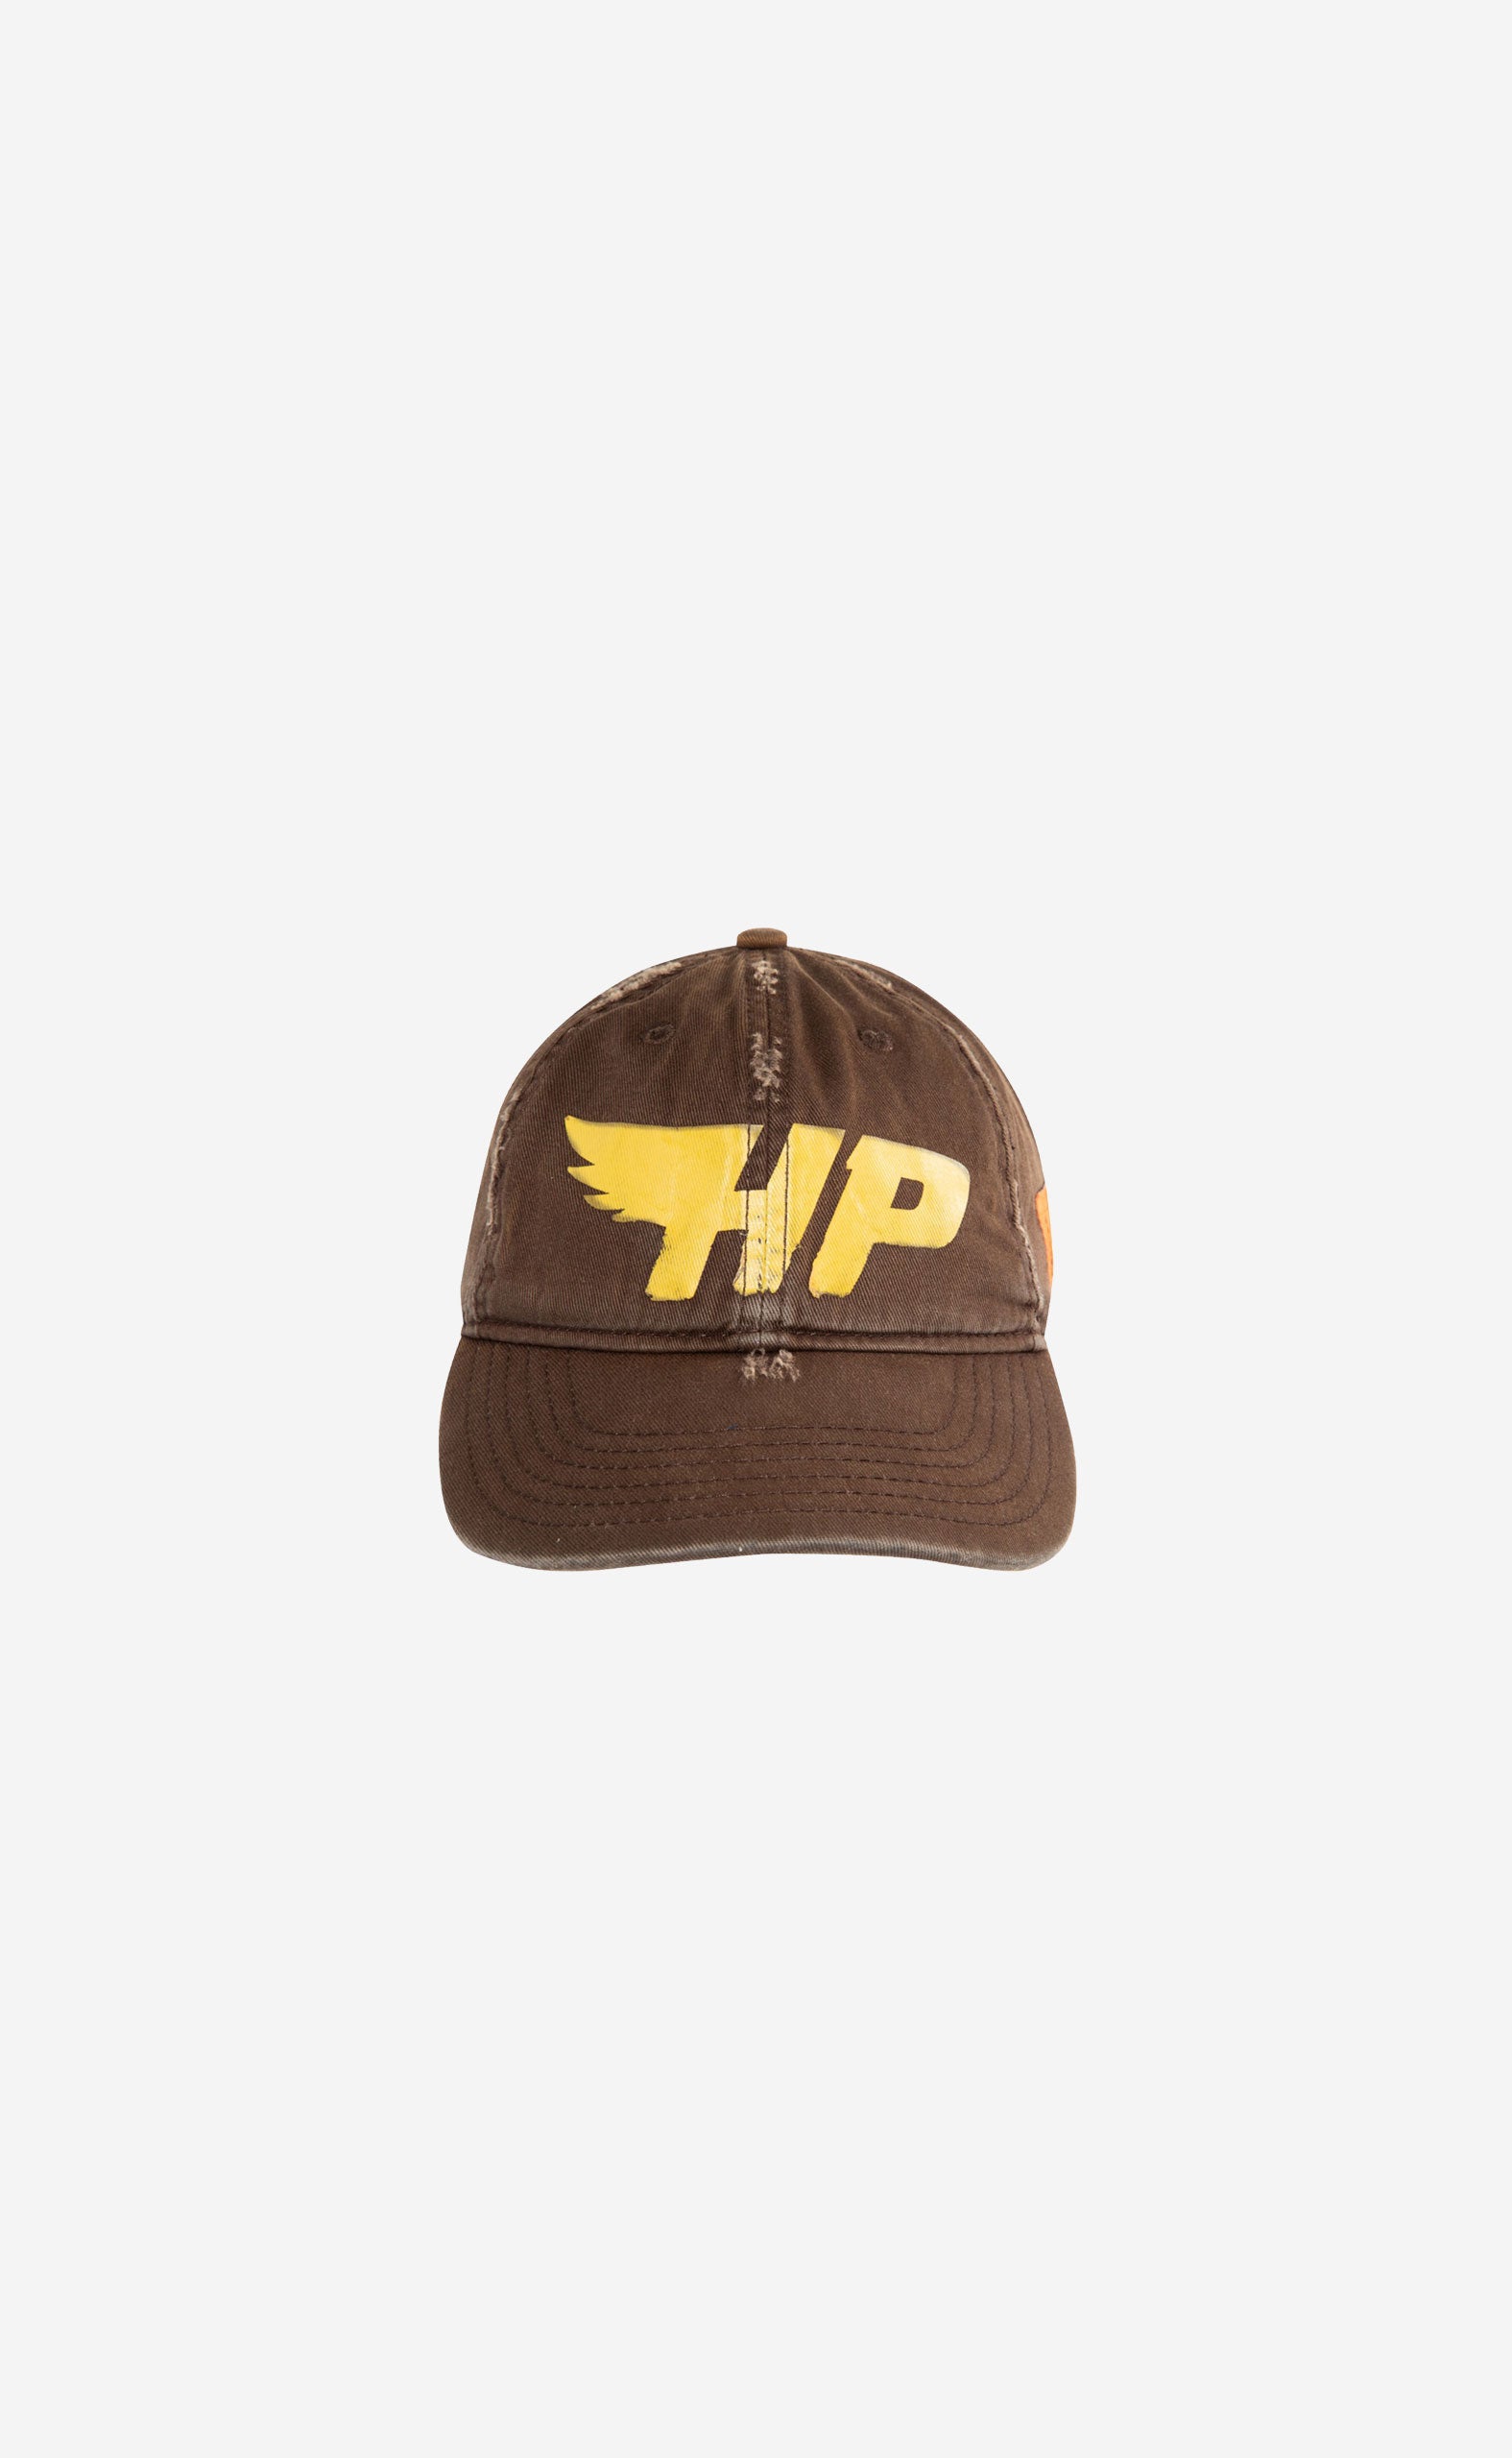 HP FLY DISTRESSED HAT BROWN YELLOW